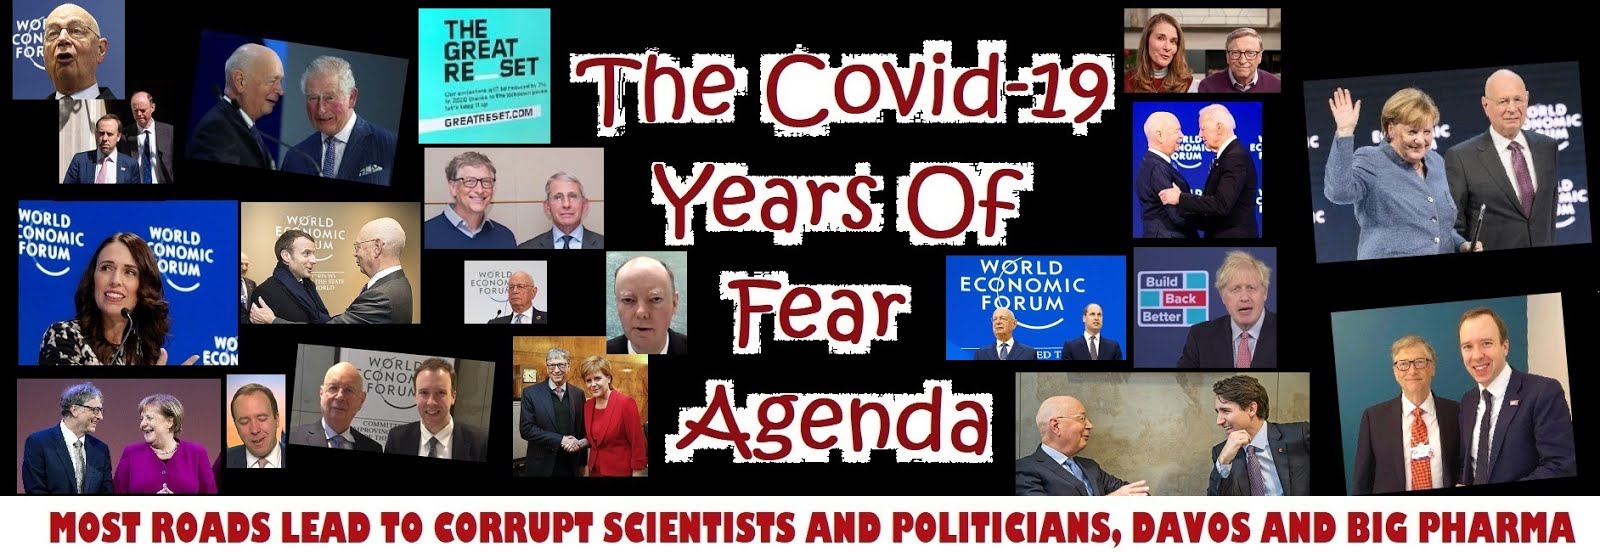 The Covid-19 Years of Fear Agenda